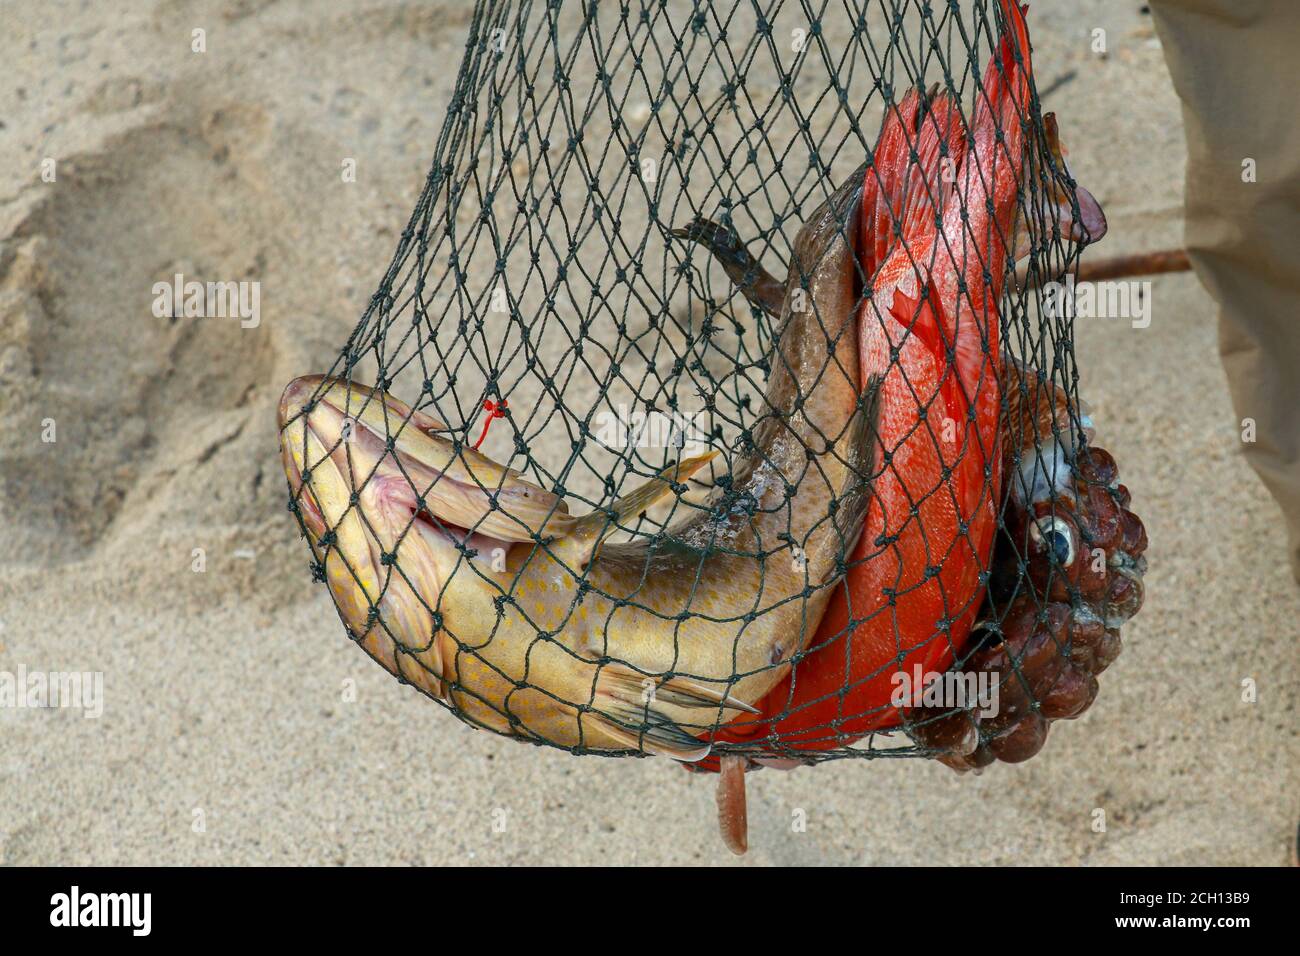 Northern red snapper and octopus in net bag. Fresh catch of a